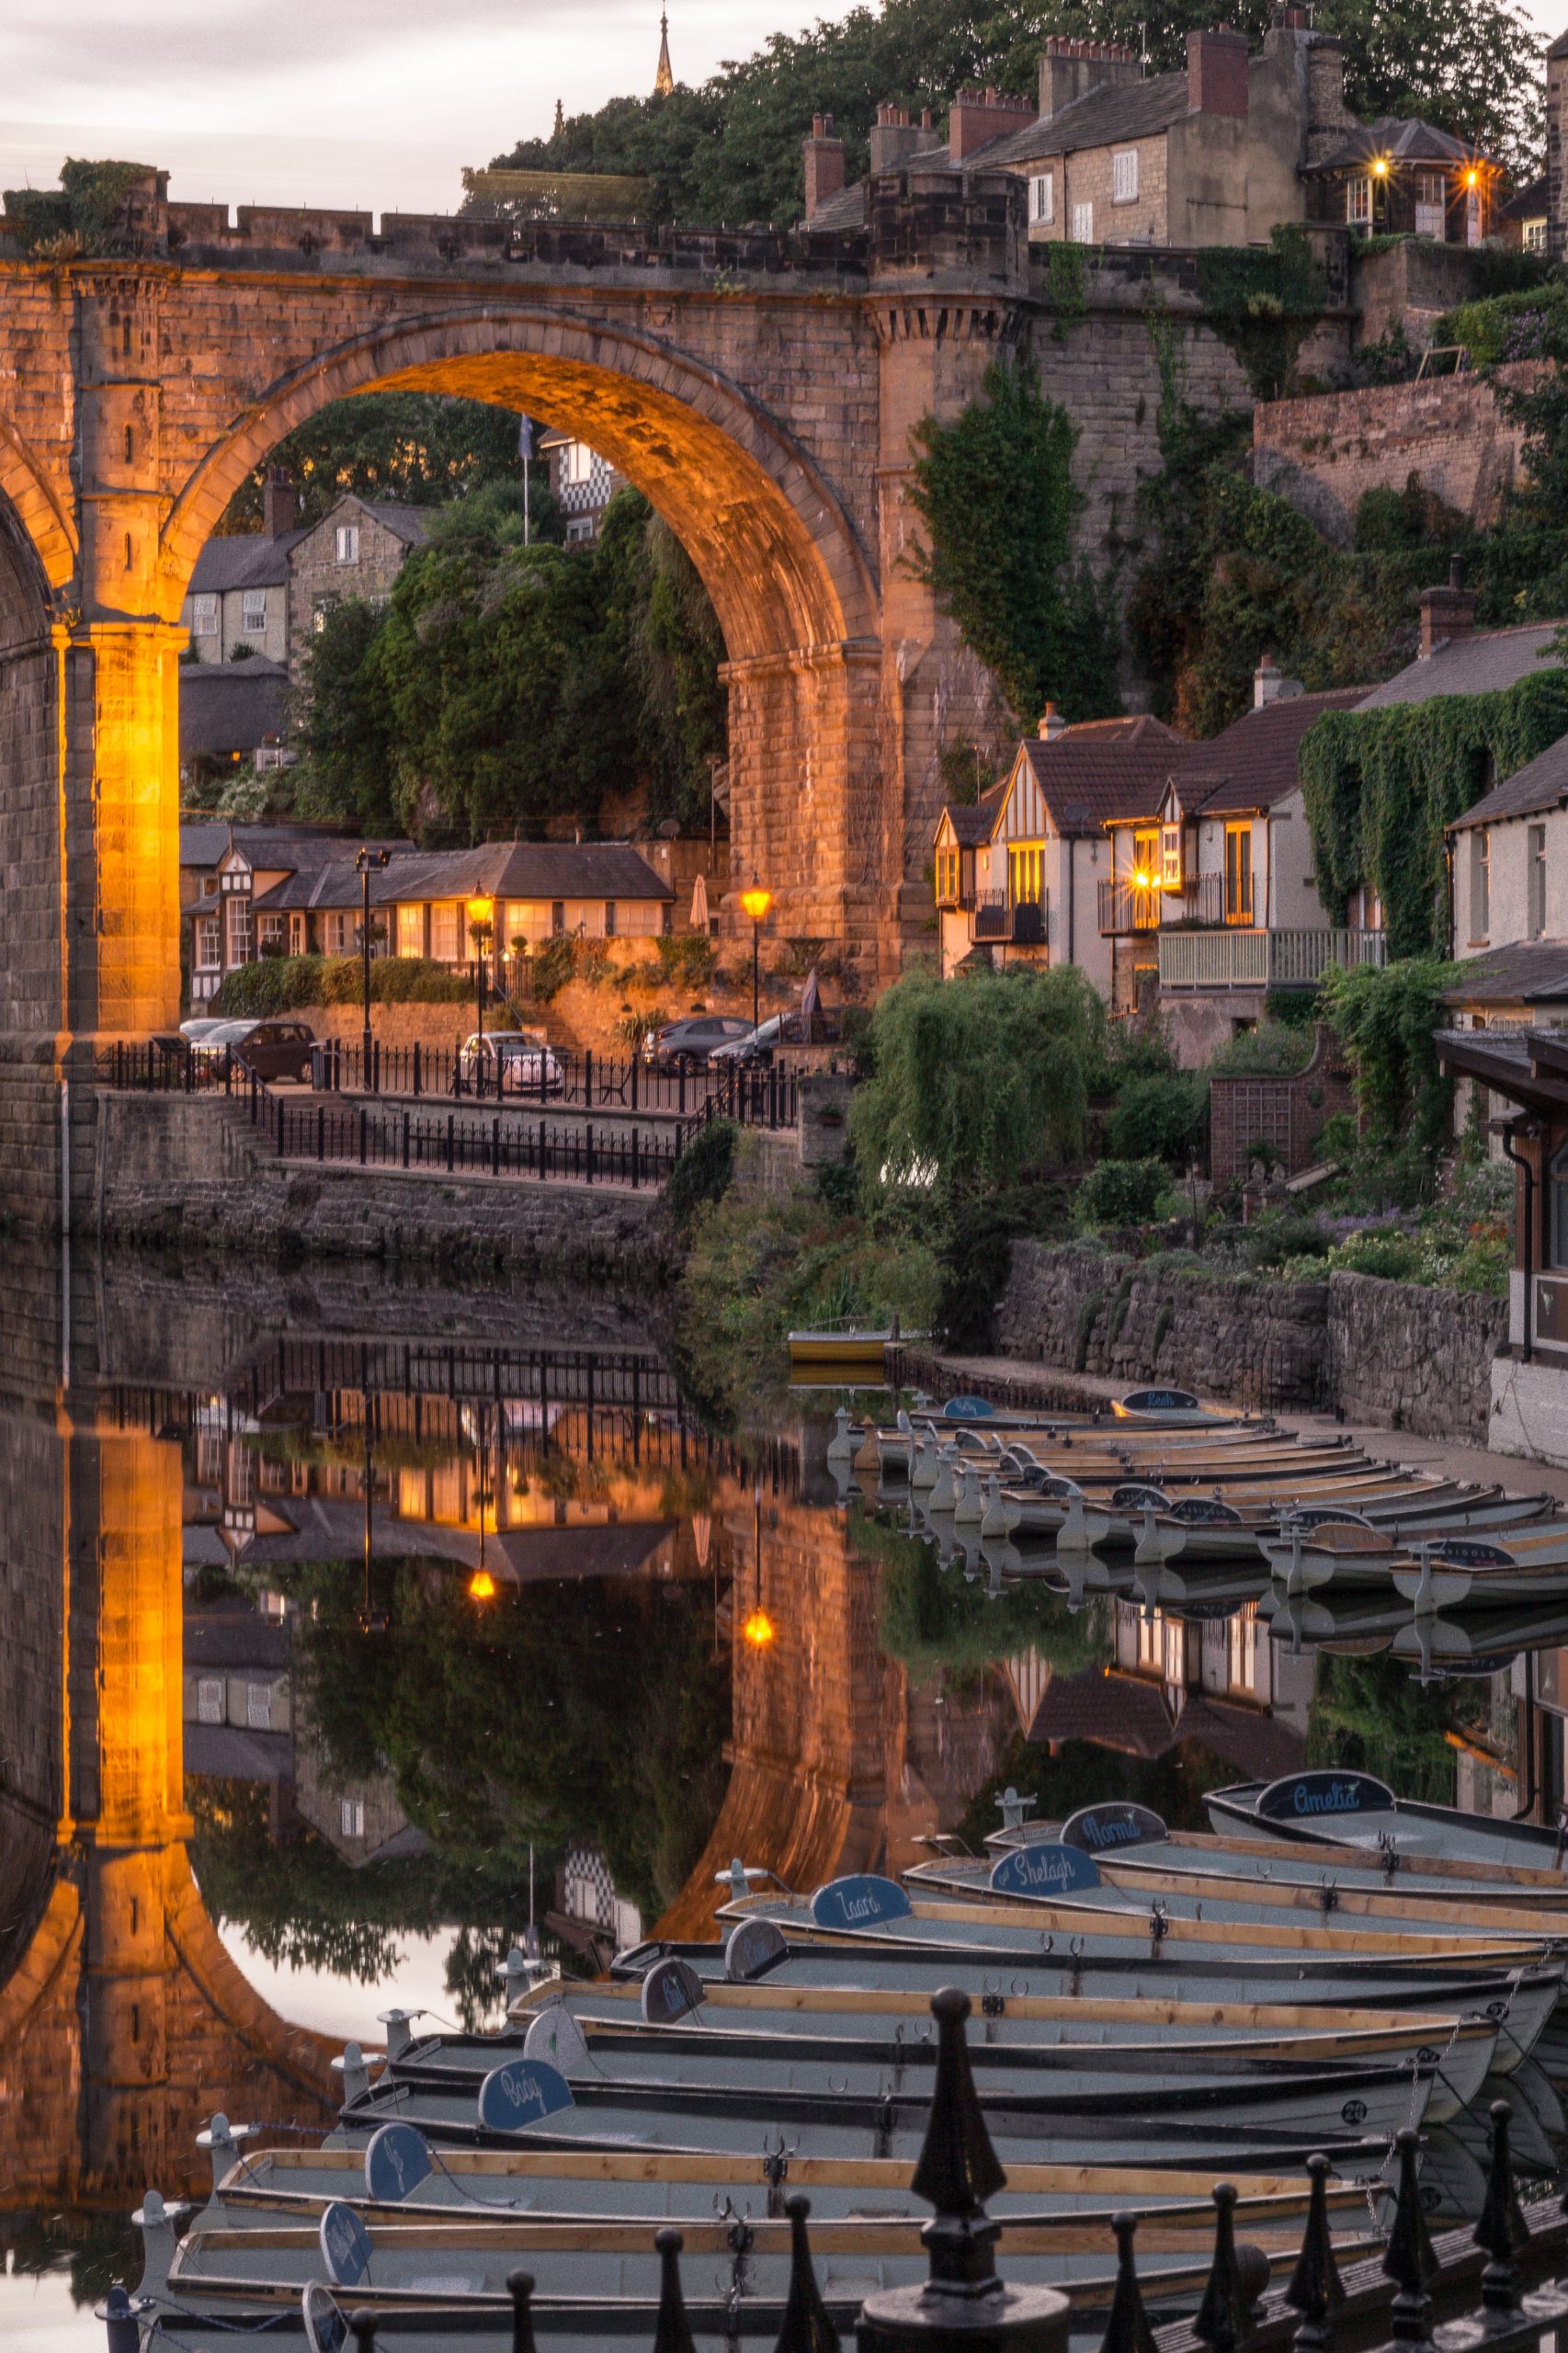 Knaresborough during the evening with its stunning lights